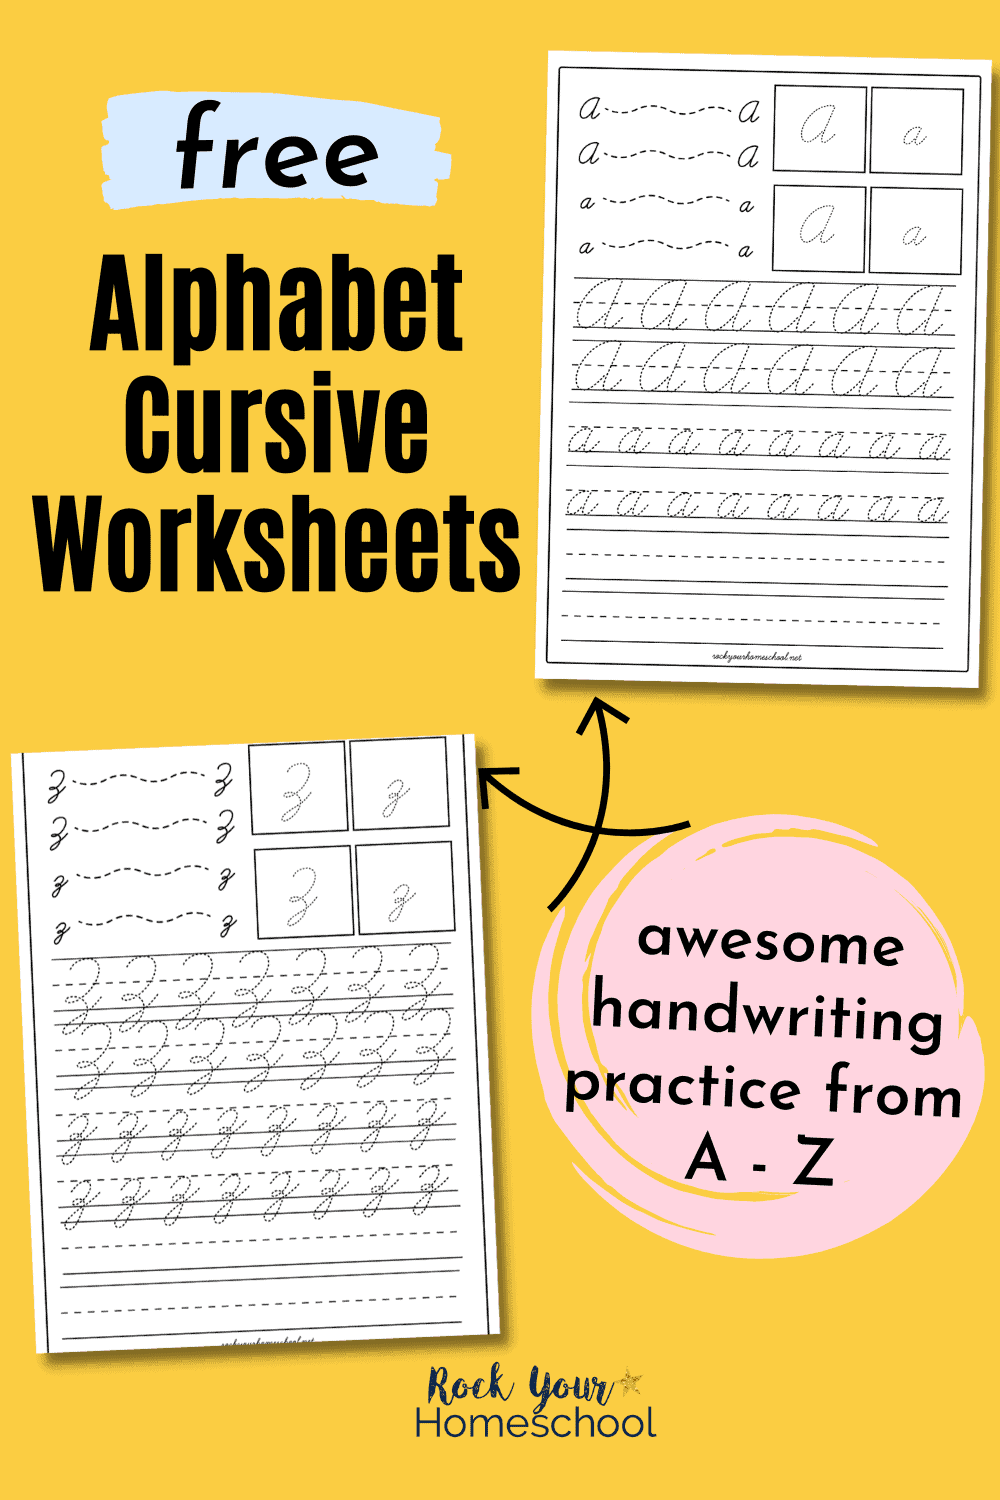 26 Free Alphabet Cursive Worksheets (in a Pack) for Easy Handwriting Practice